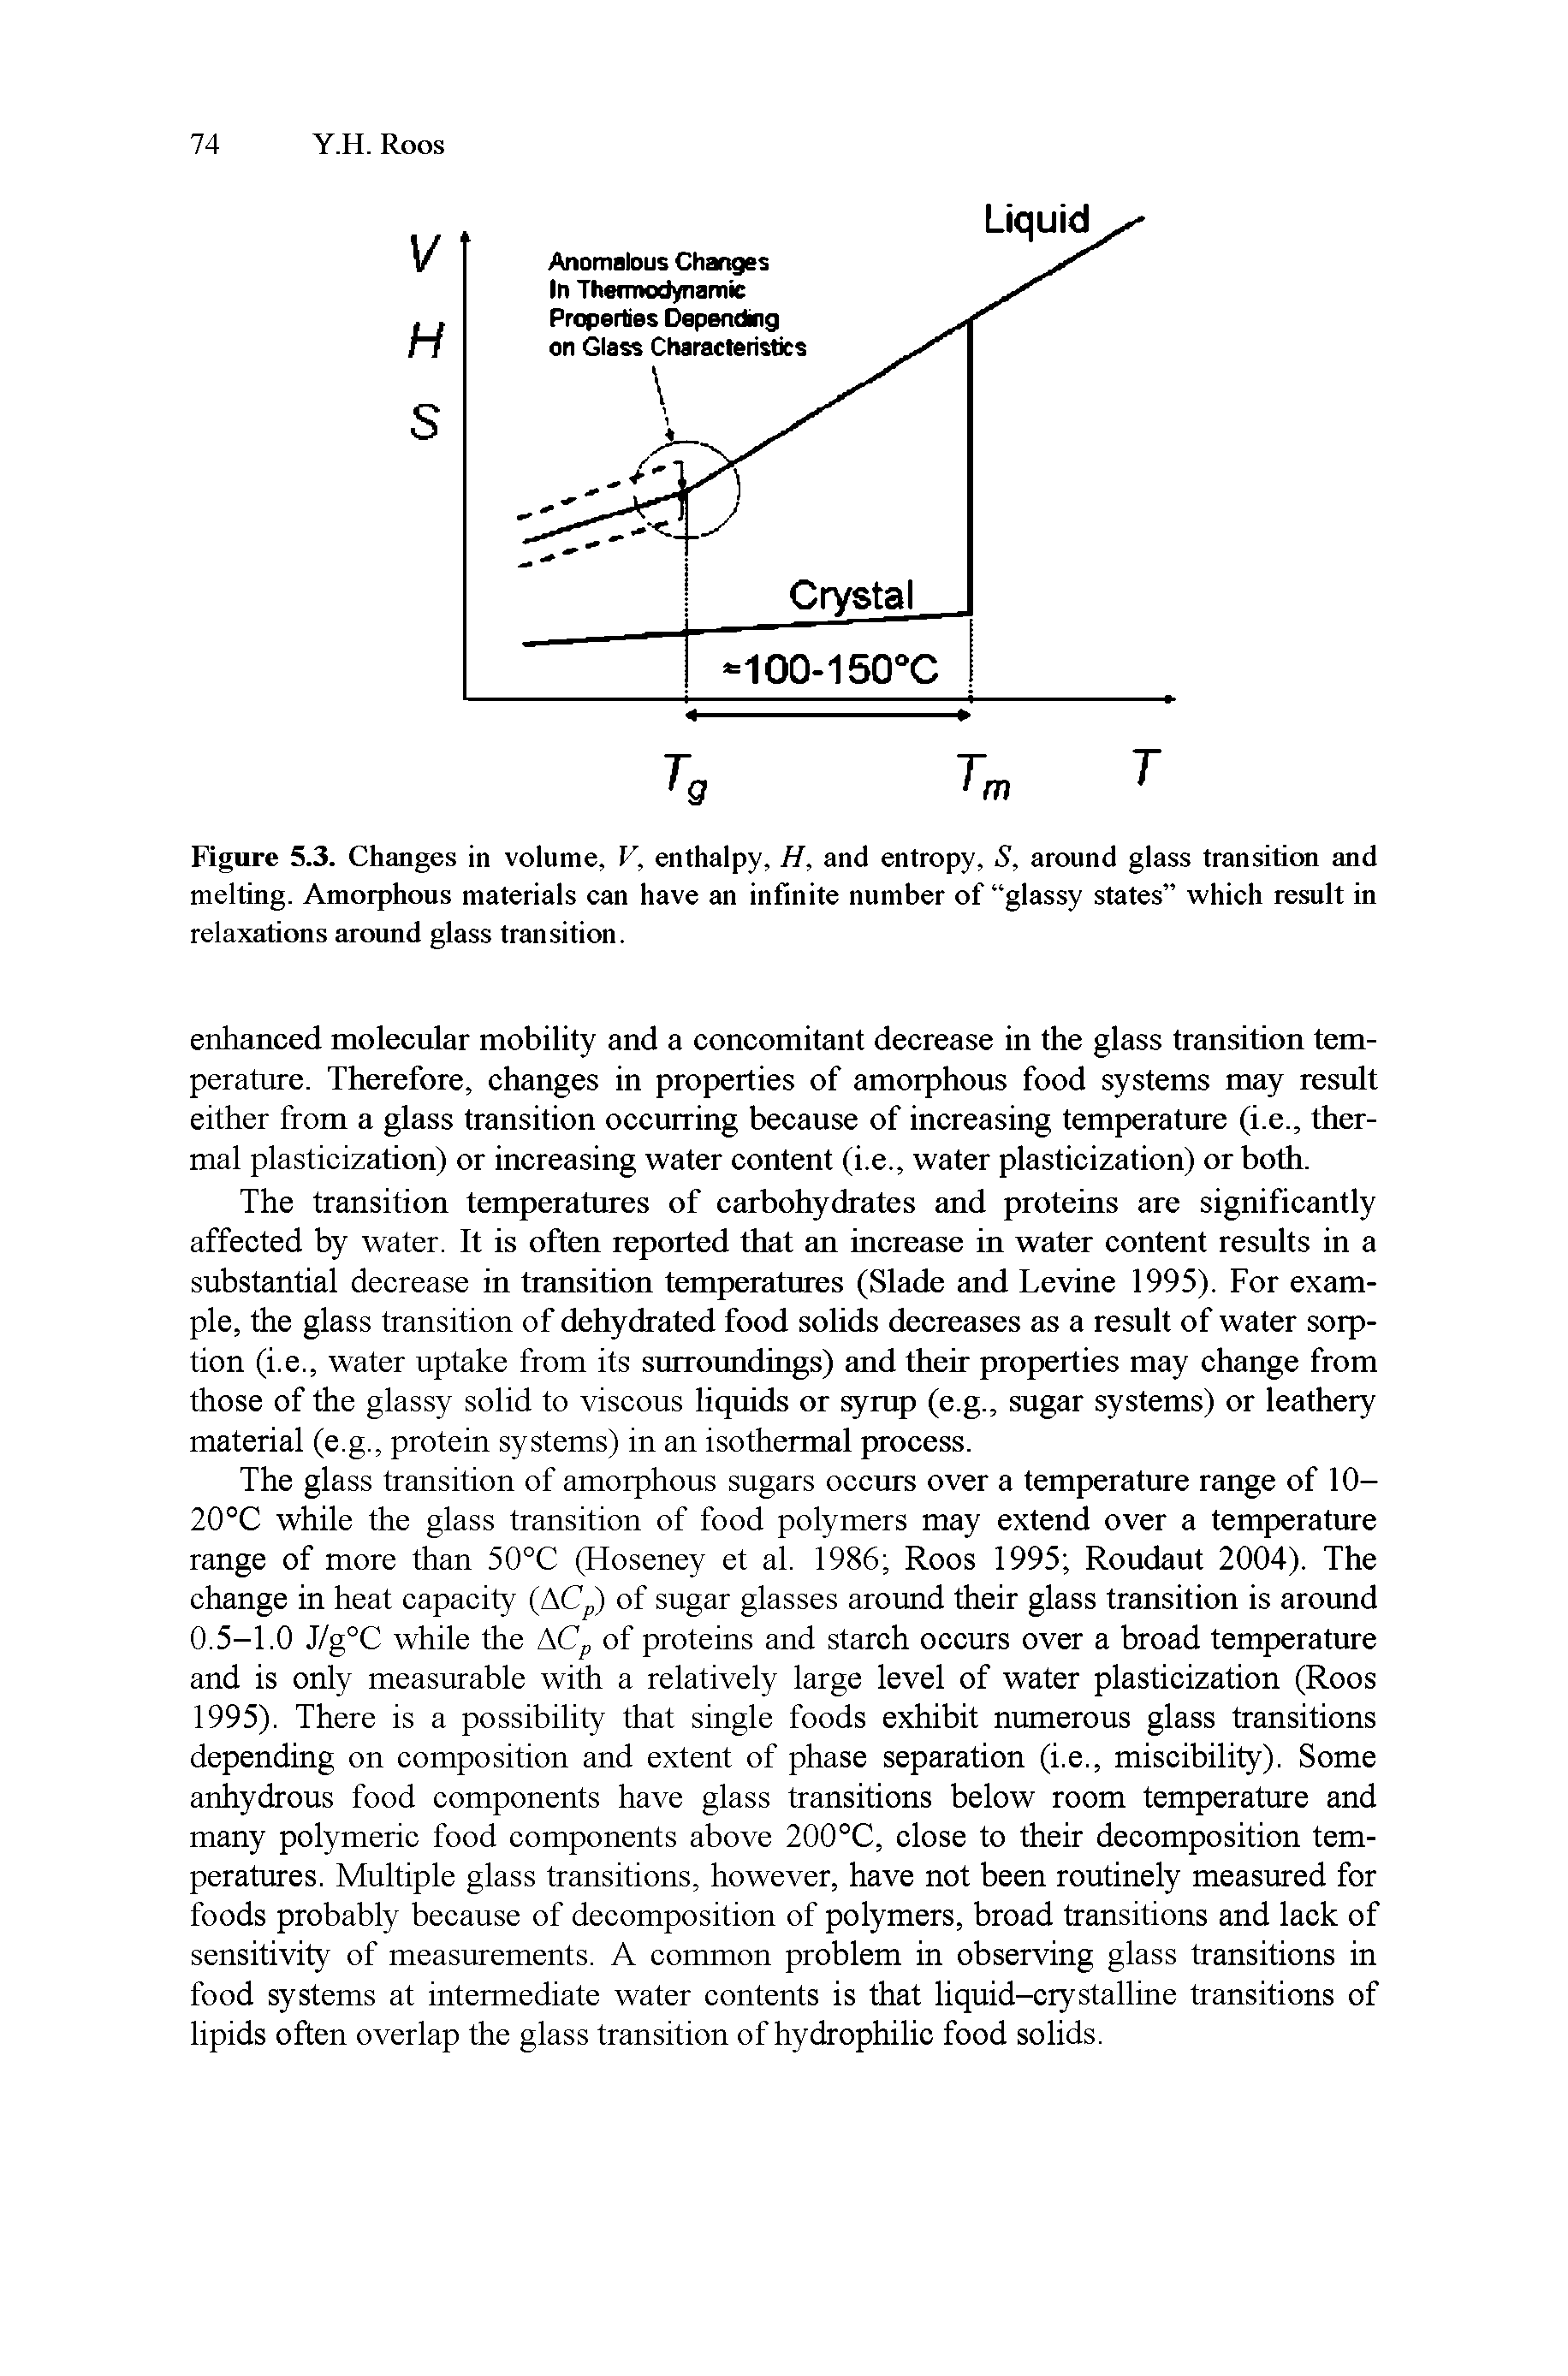 Figure 5.3. Changes in volume, V, enthalpy, H, and entropy, S, around glass transition and melting. Amorphous materials can have an infinite number of glassy states which result in relaxations around glass transition.